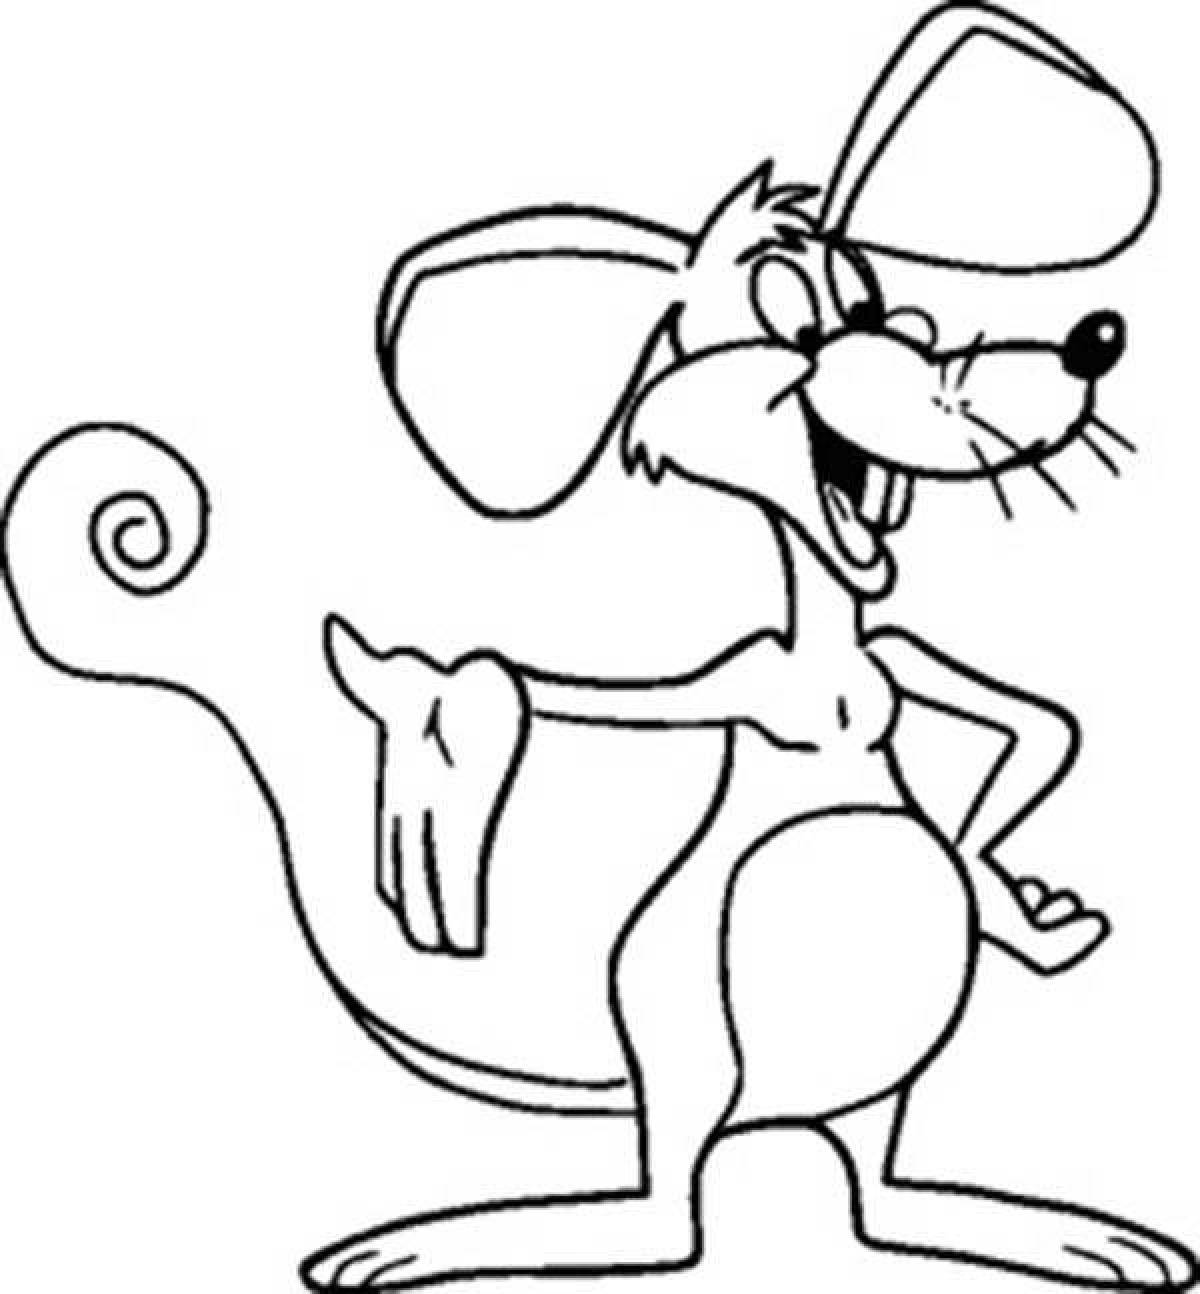 Coloring book funny buba and mouse